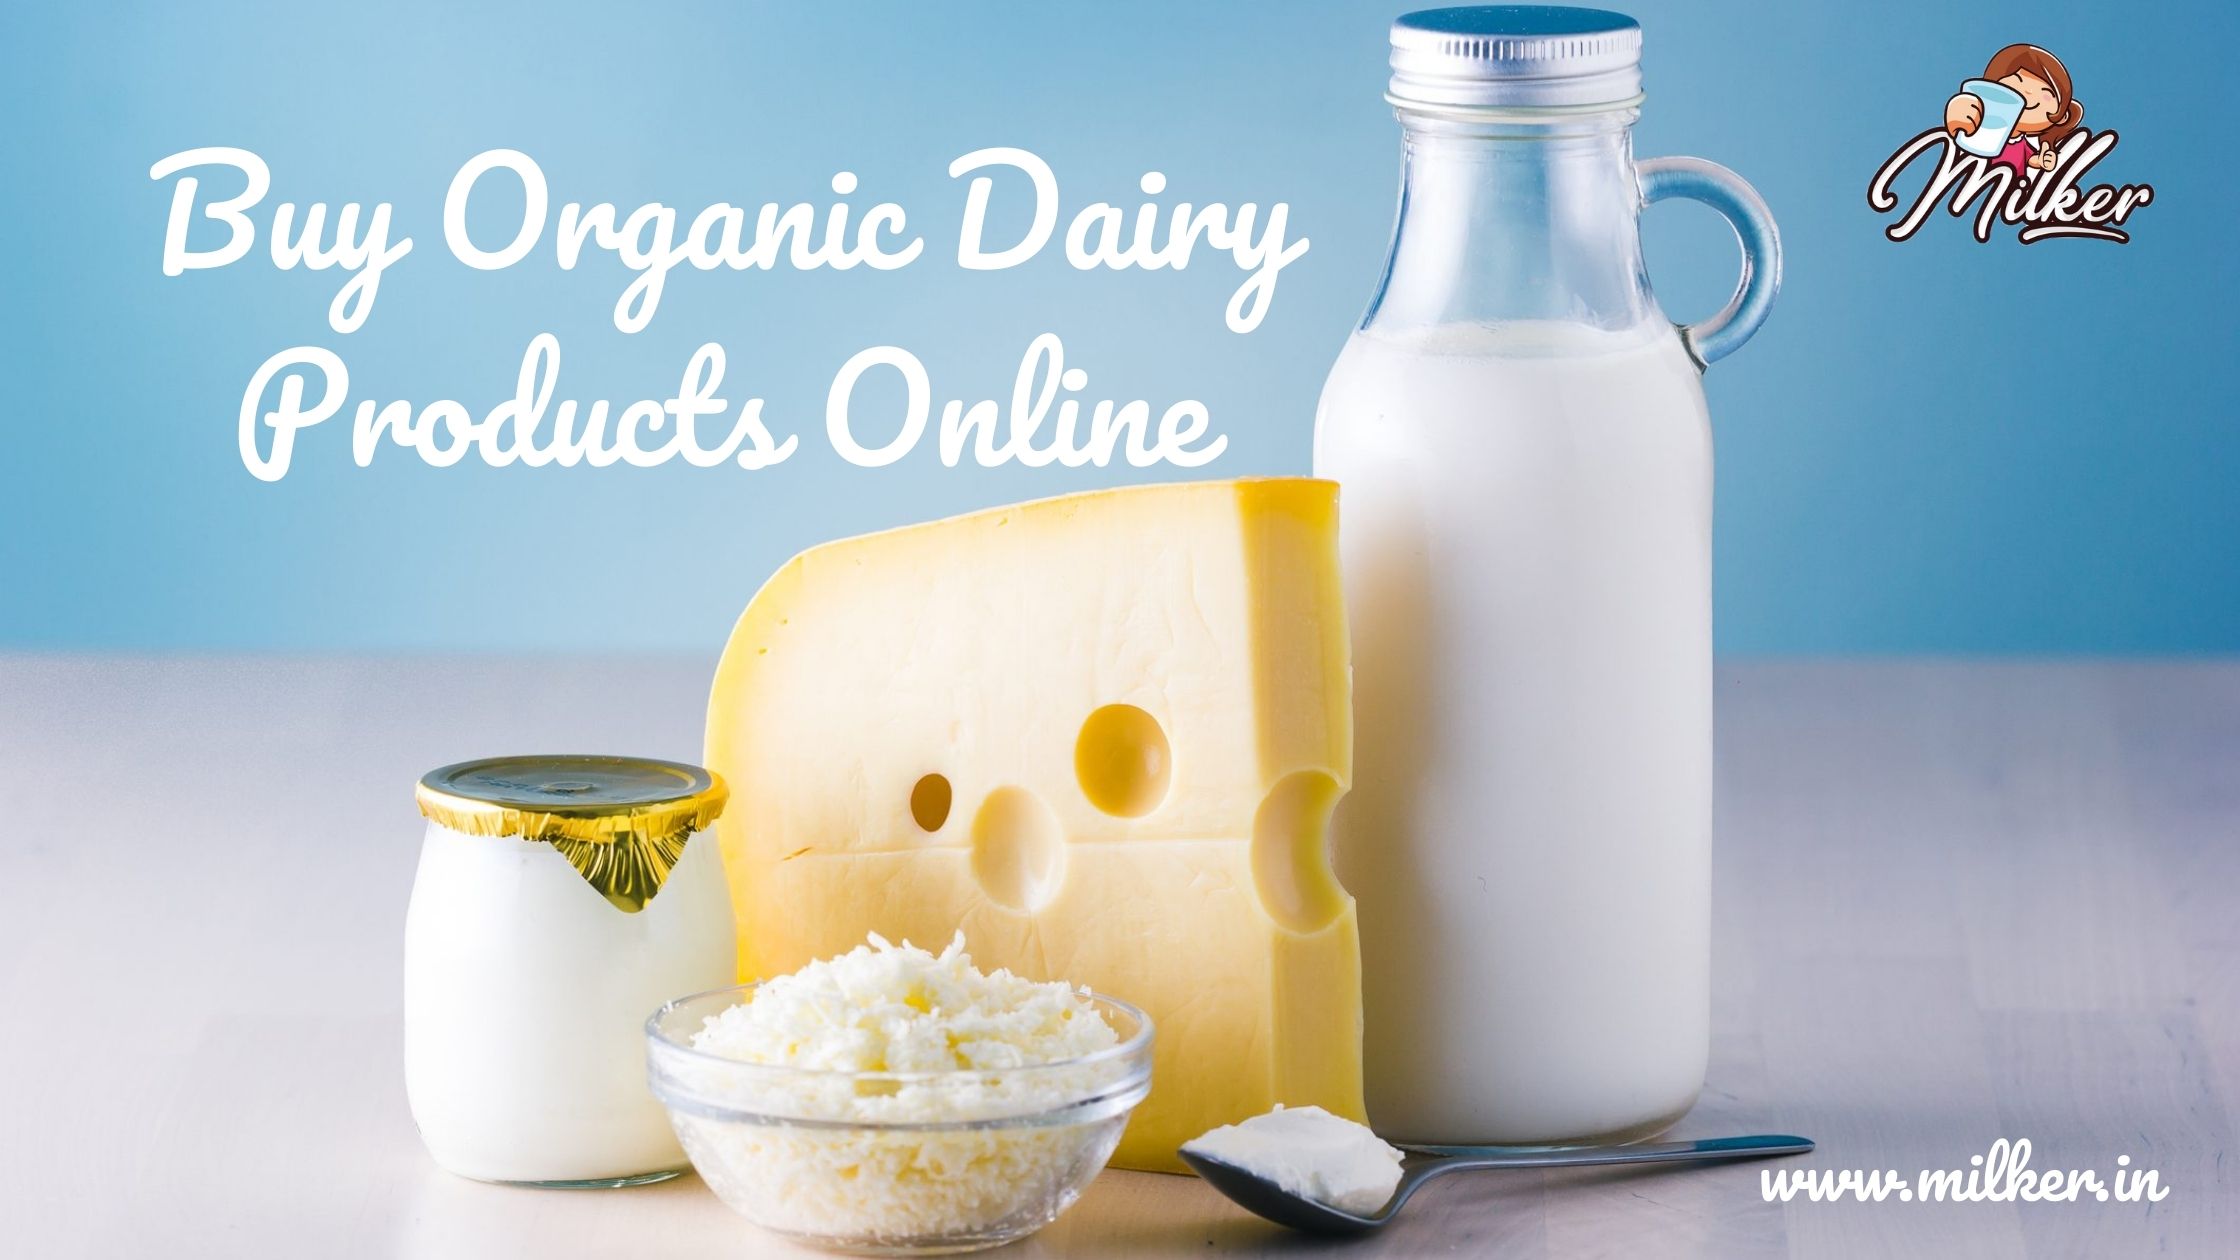 Buy organic dairy products online